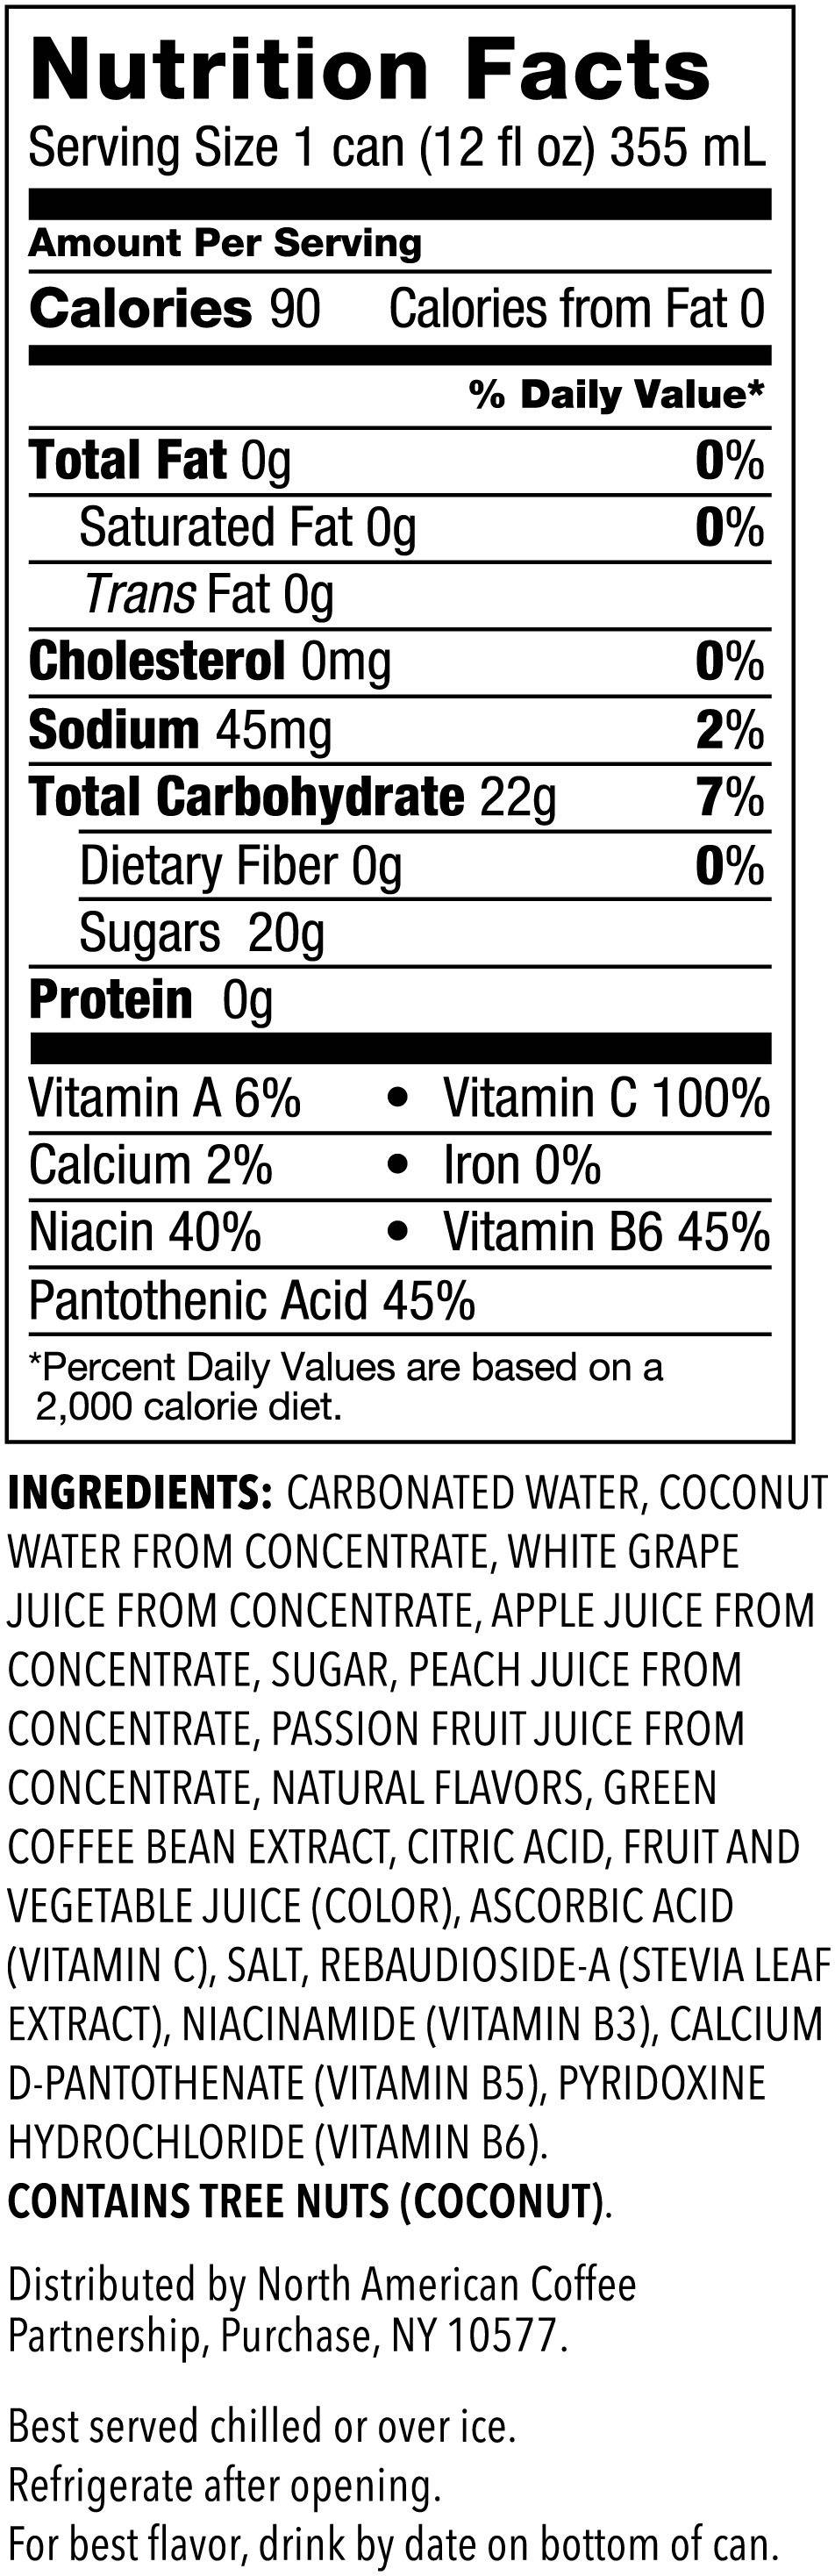 Image describing nutrition information for product Starbucks Refreshers Peach Passionfruit